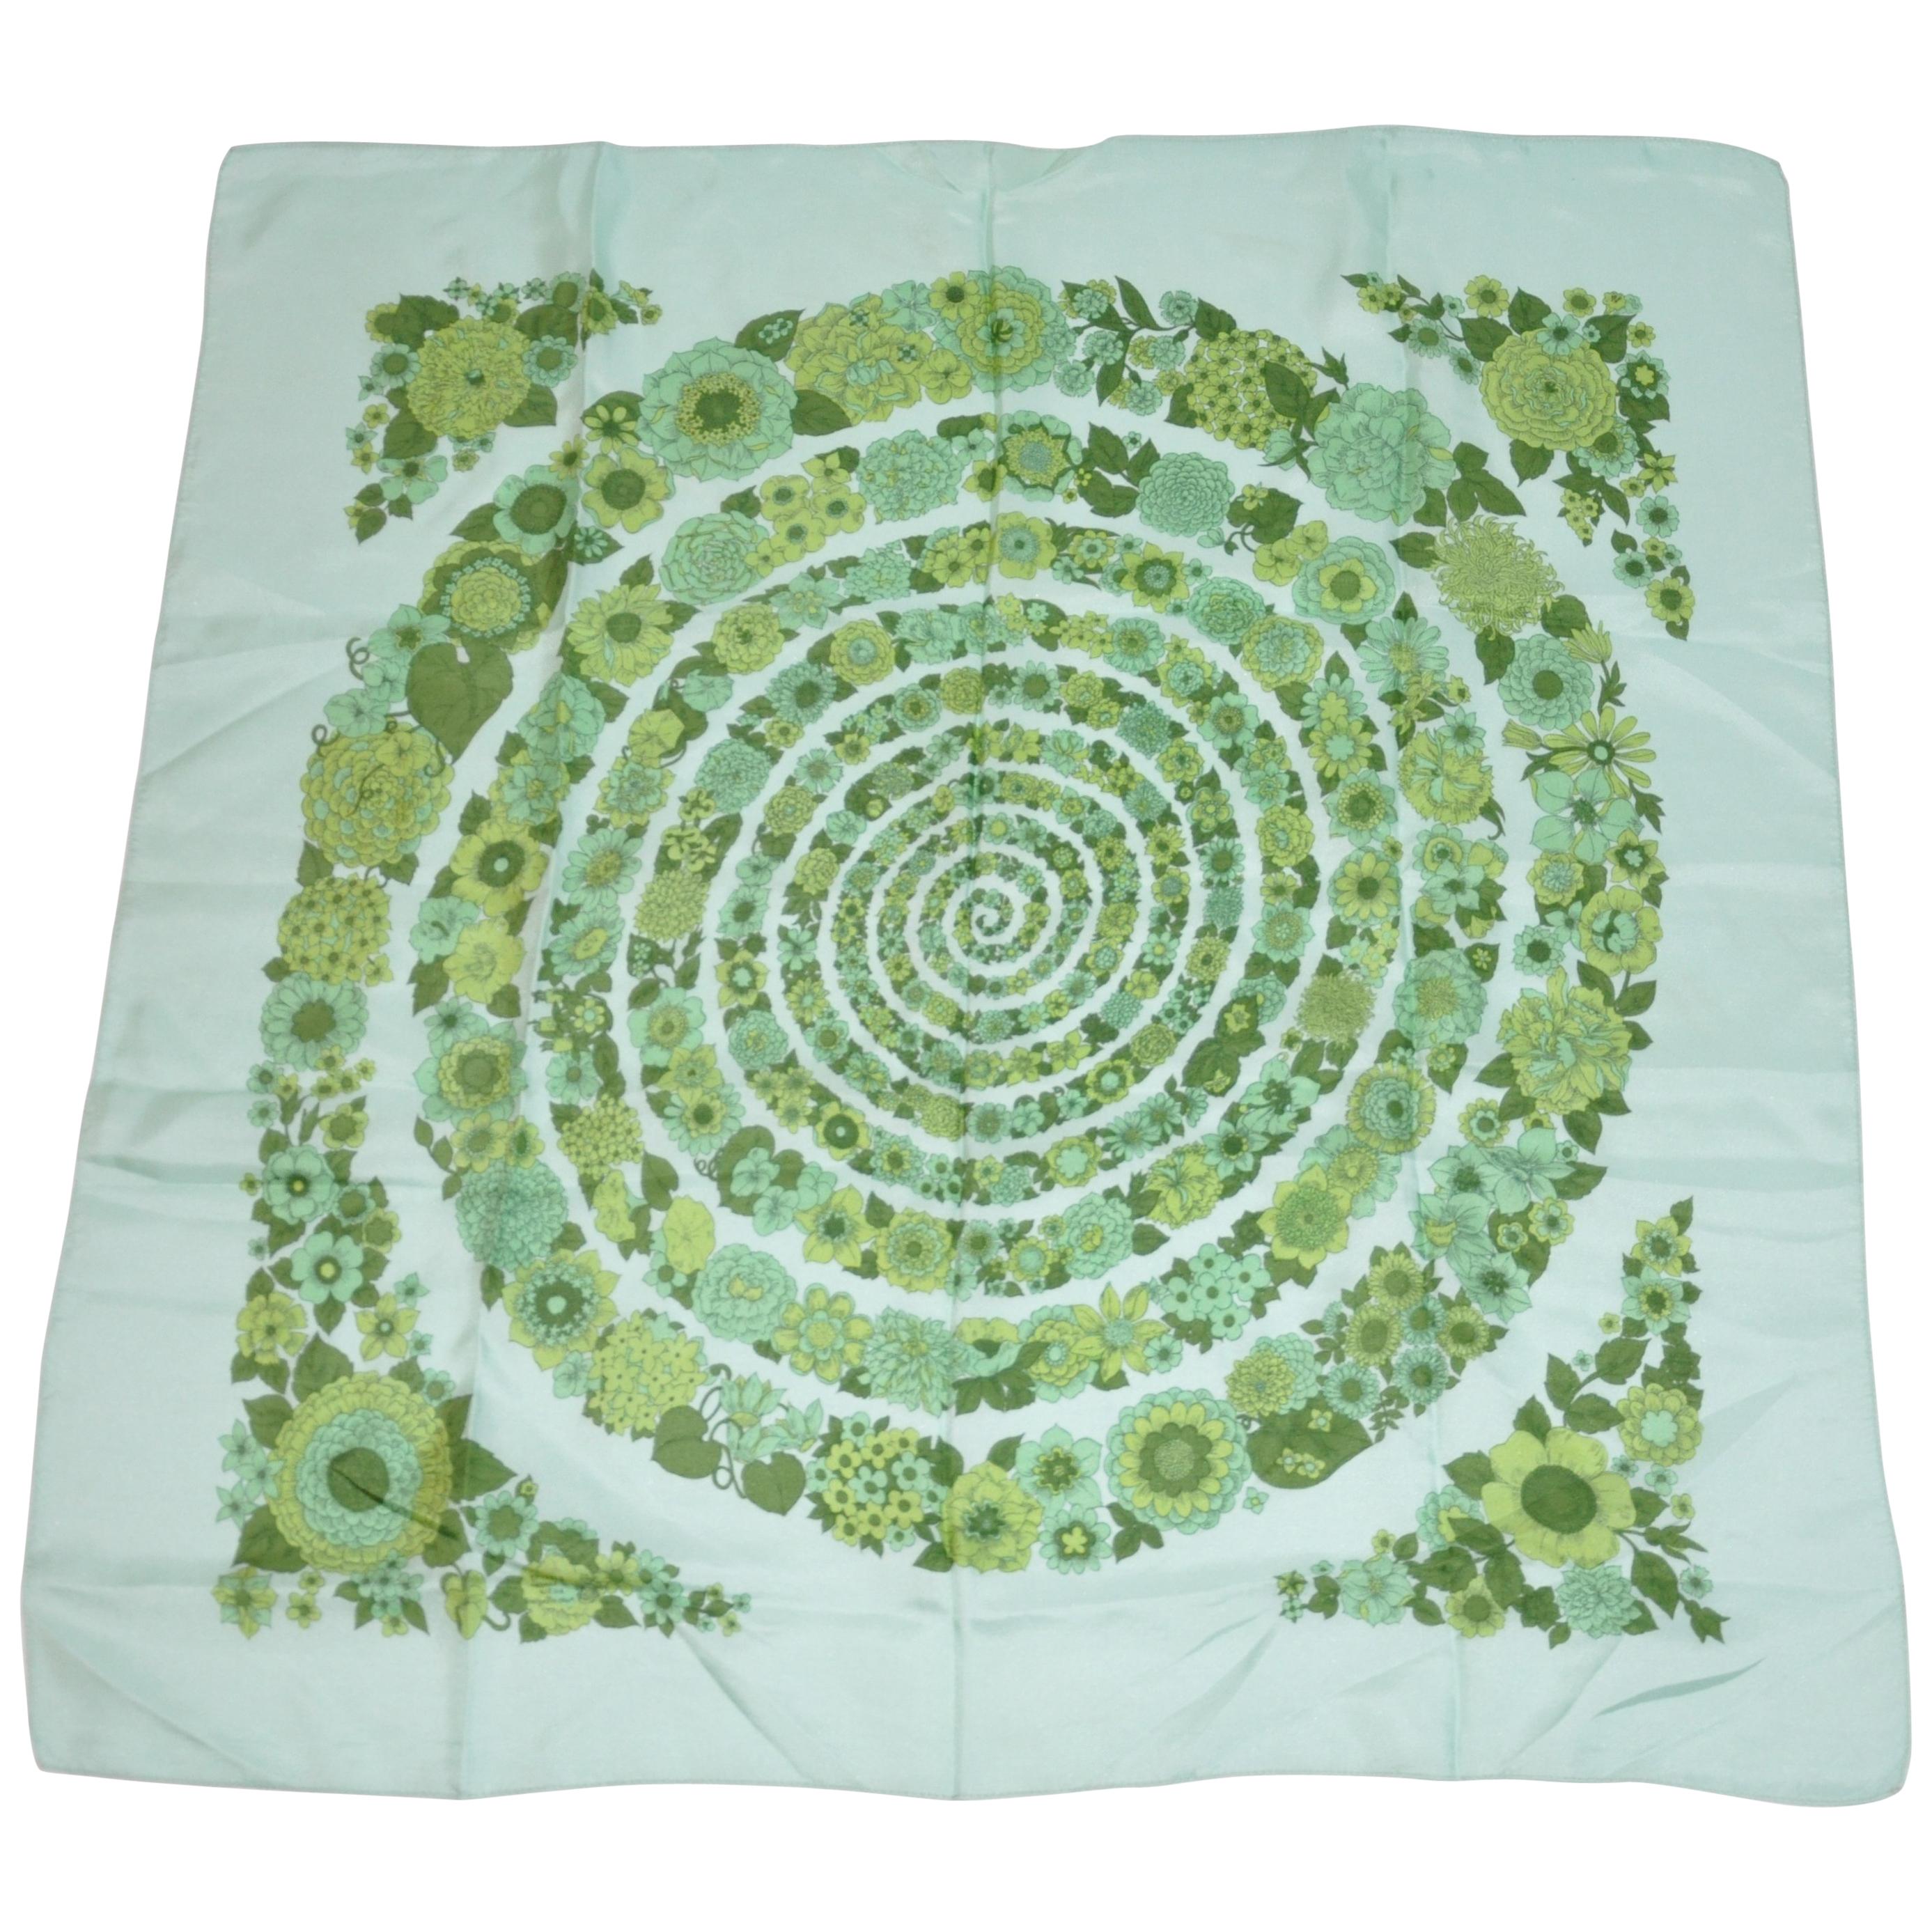 Liberty of London Multi Shades of Greens "Circular Trail of Florals" Silk Scarf